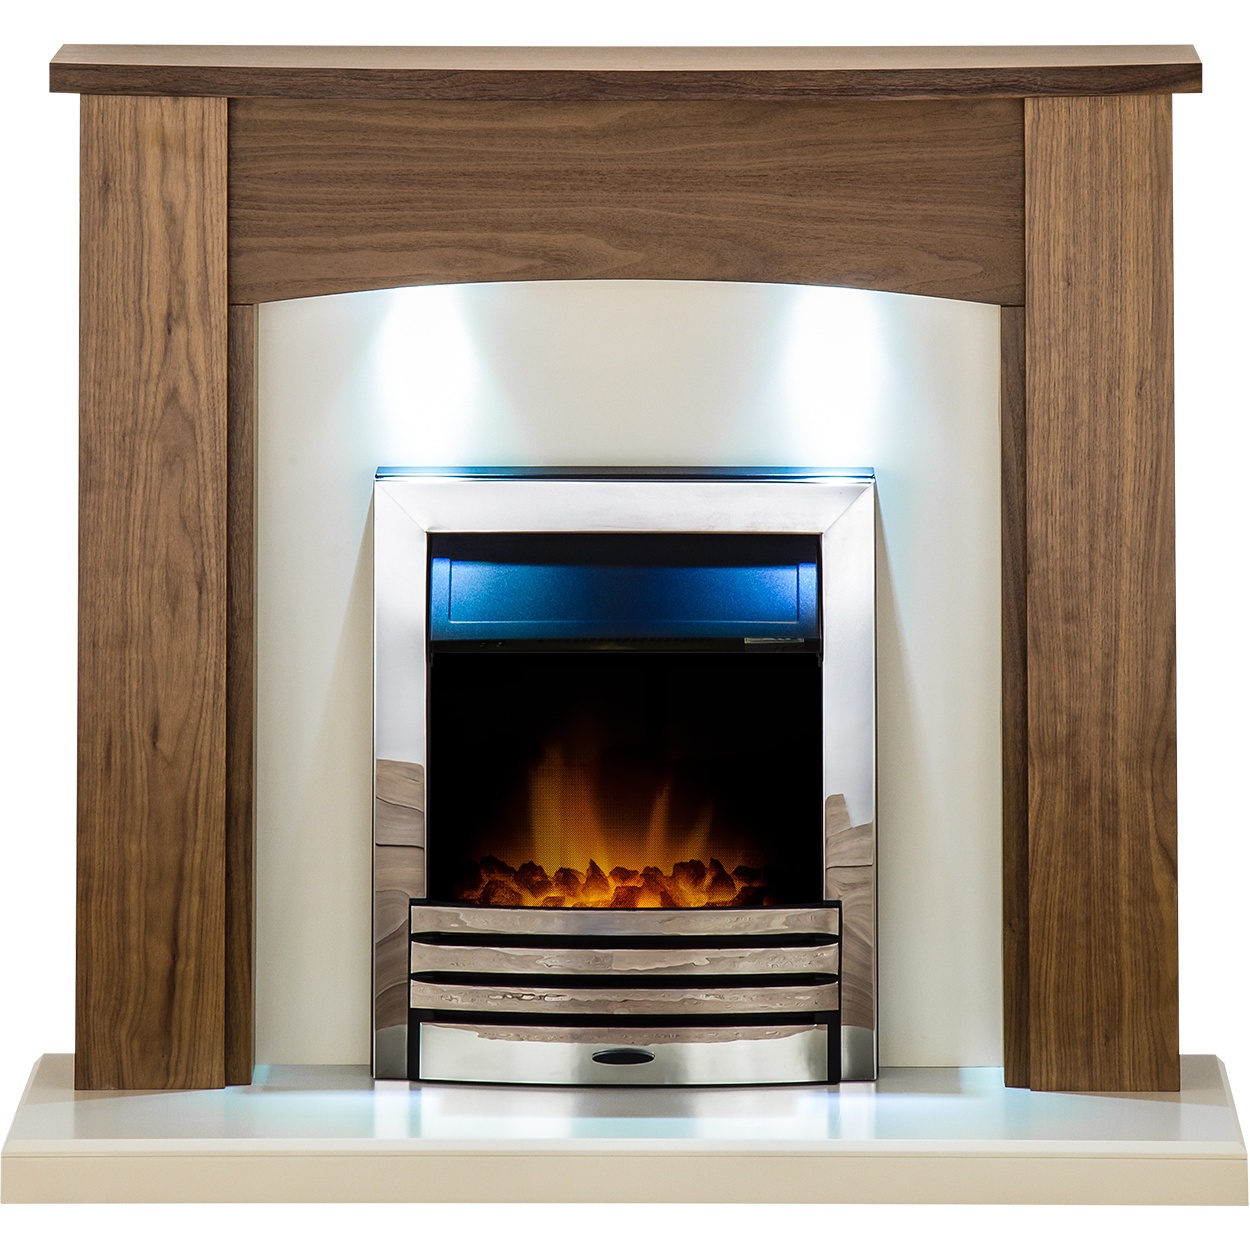 Wooden Fireplace Surround Luxury Details About Adam Fireplace Suite Walnut & Eclipse Electric Fire Chrome and Downlights 48"